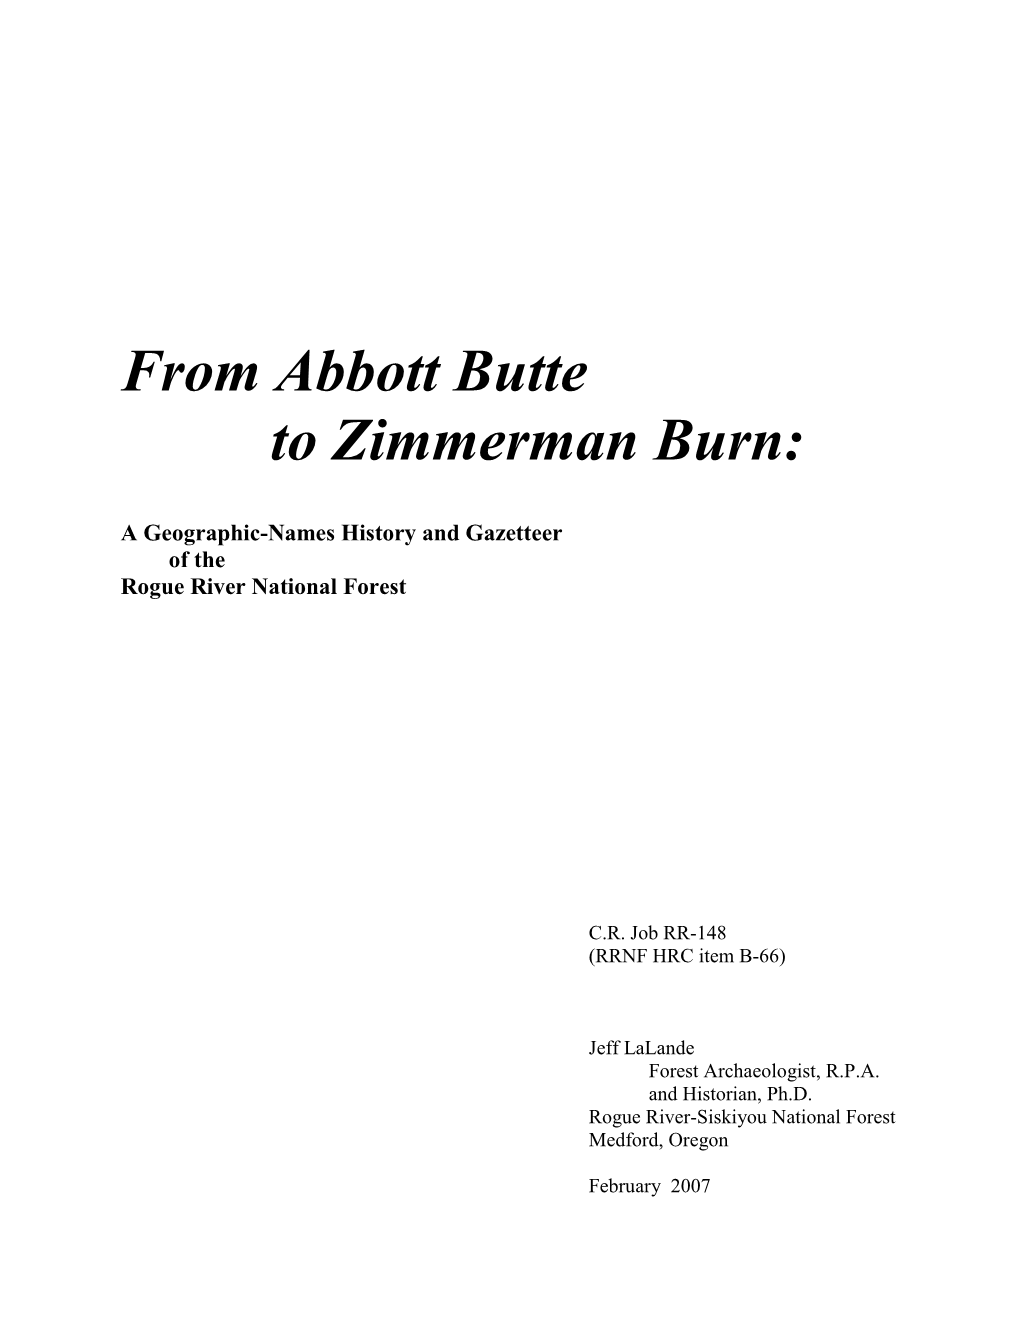 From Abbott Butte to Zimmerman Burn: a Geographic-Names History And